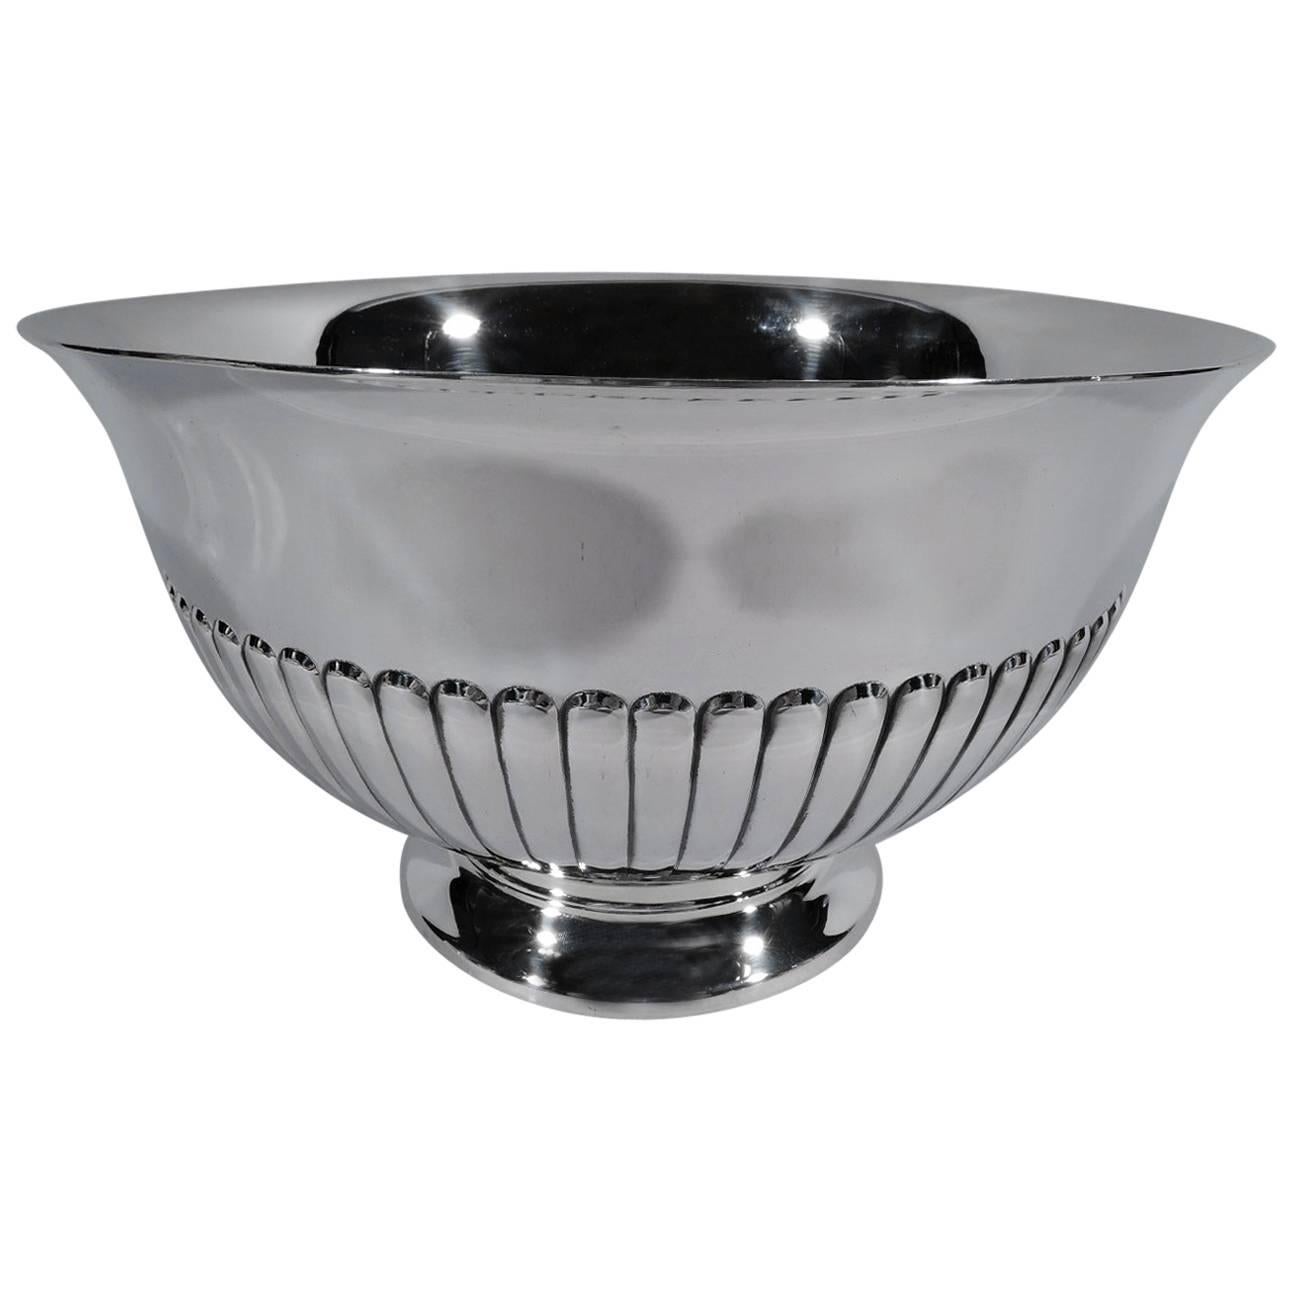 Cartier Mid-Century Modern Classical Sterling Silver Footed Bowl